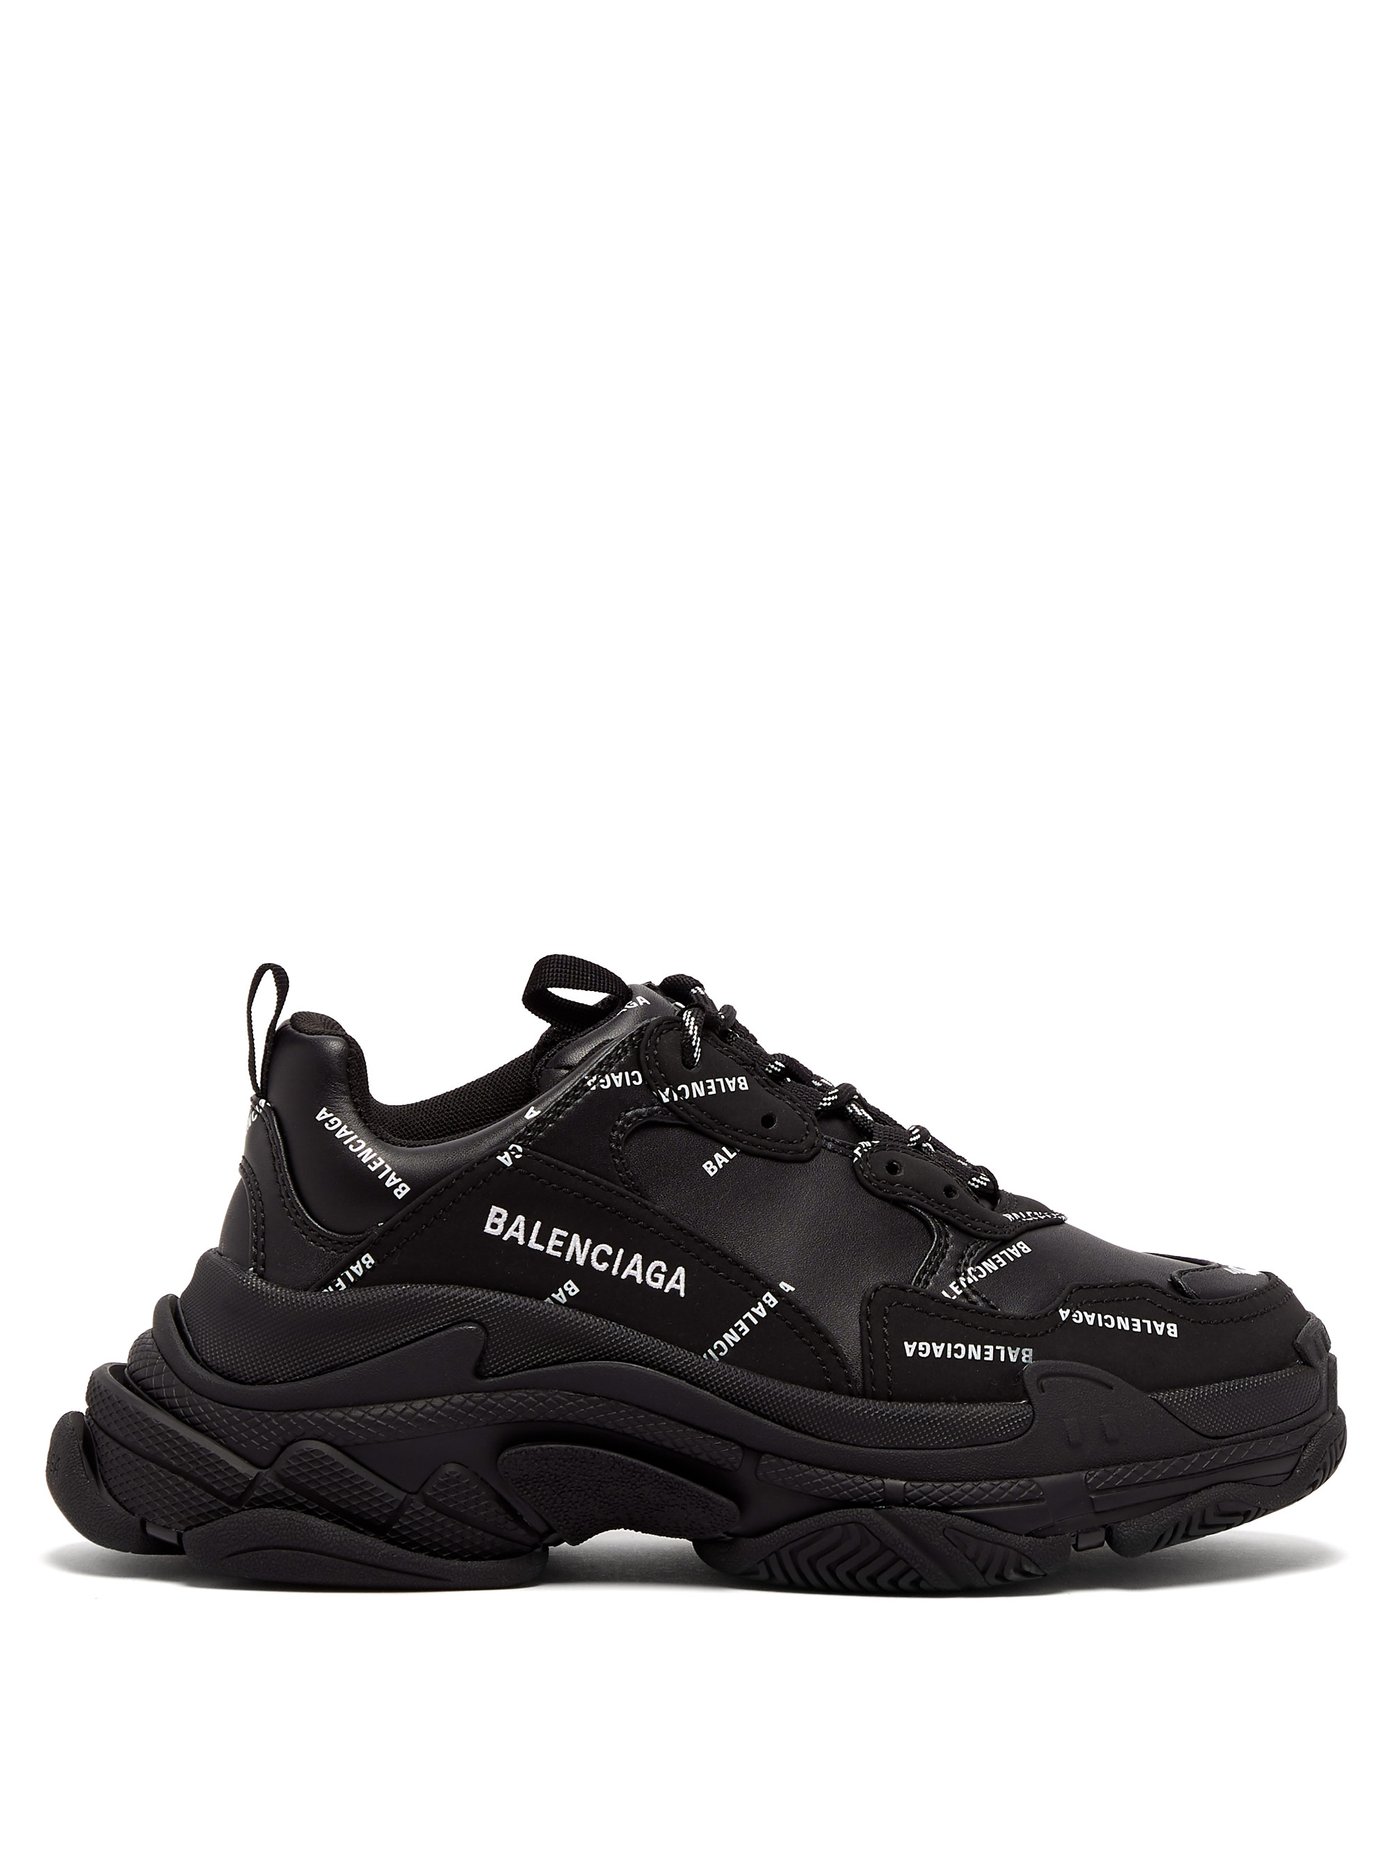 images about balenciagatriples on imgrum